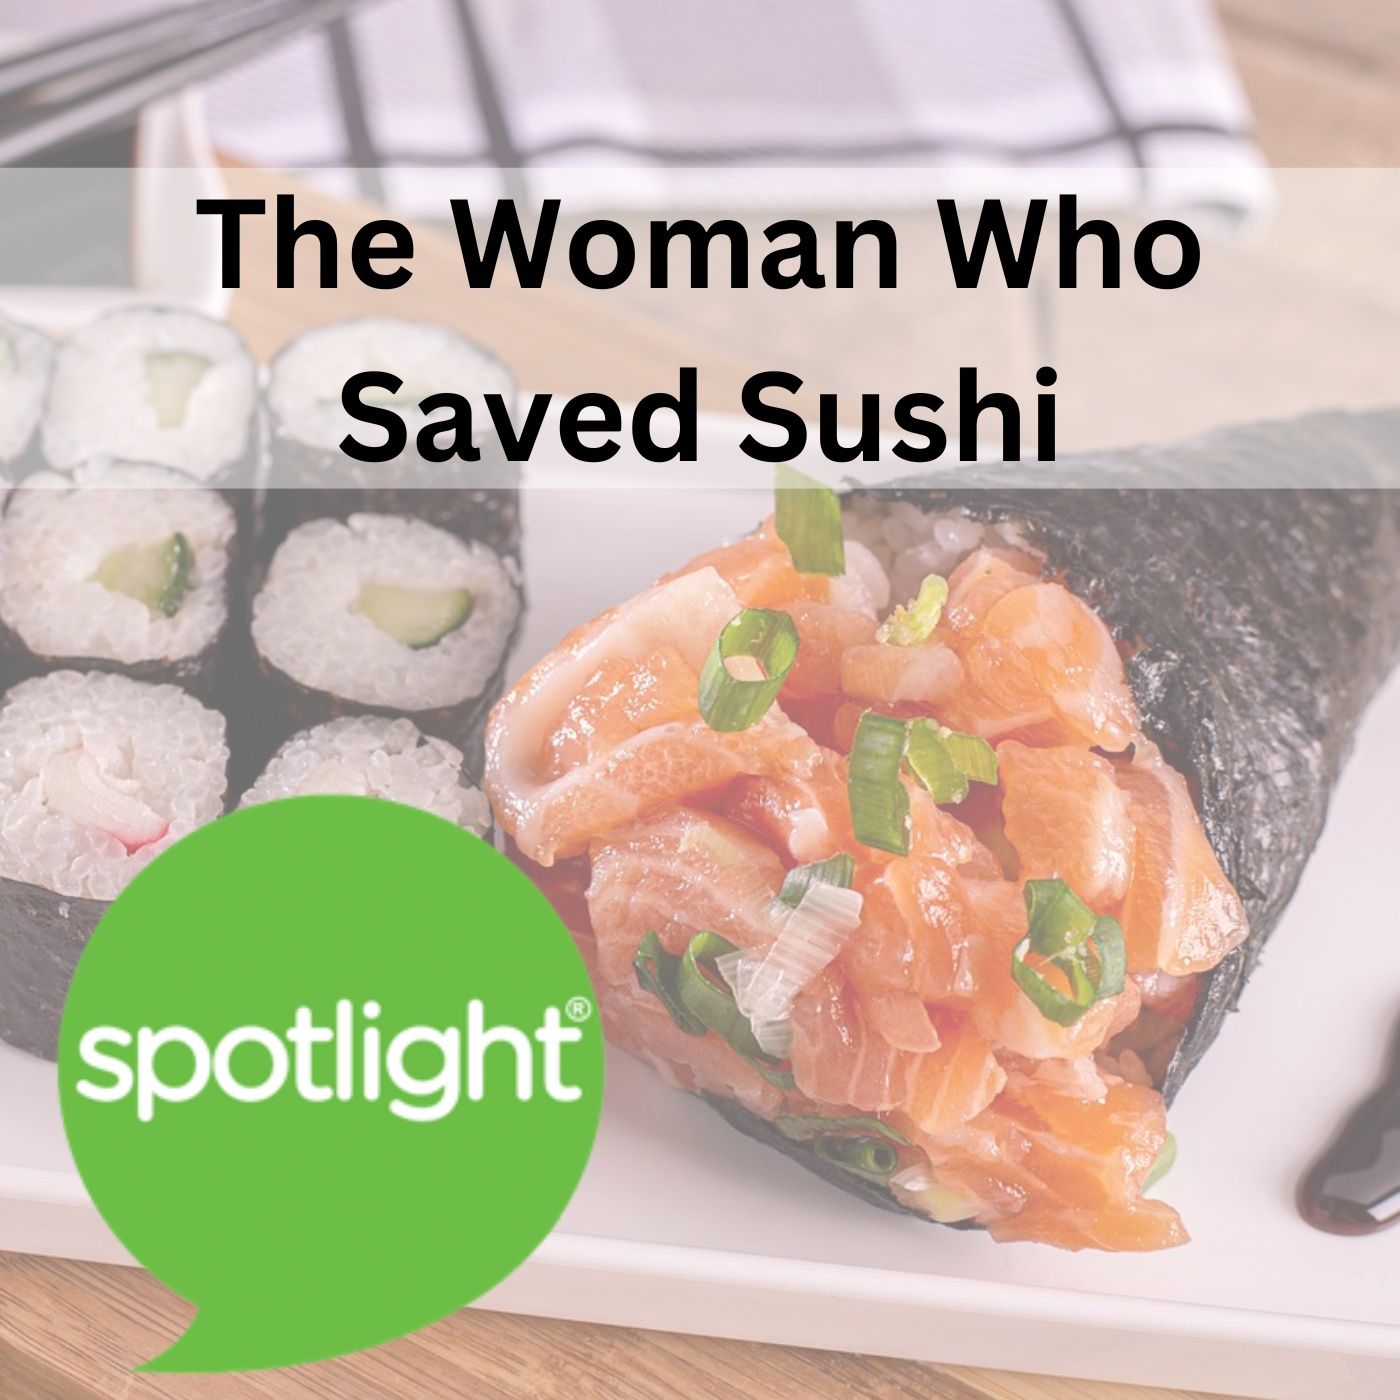 The Woman Who Saved Sushi